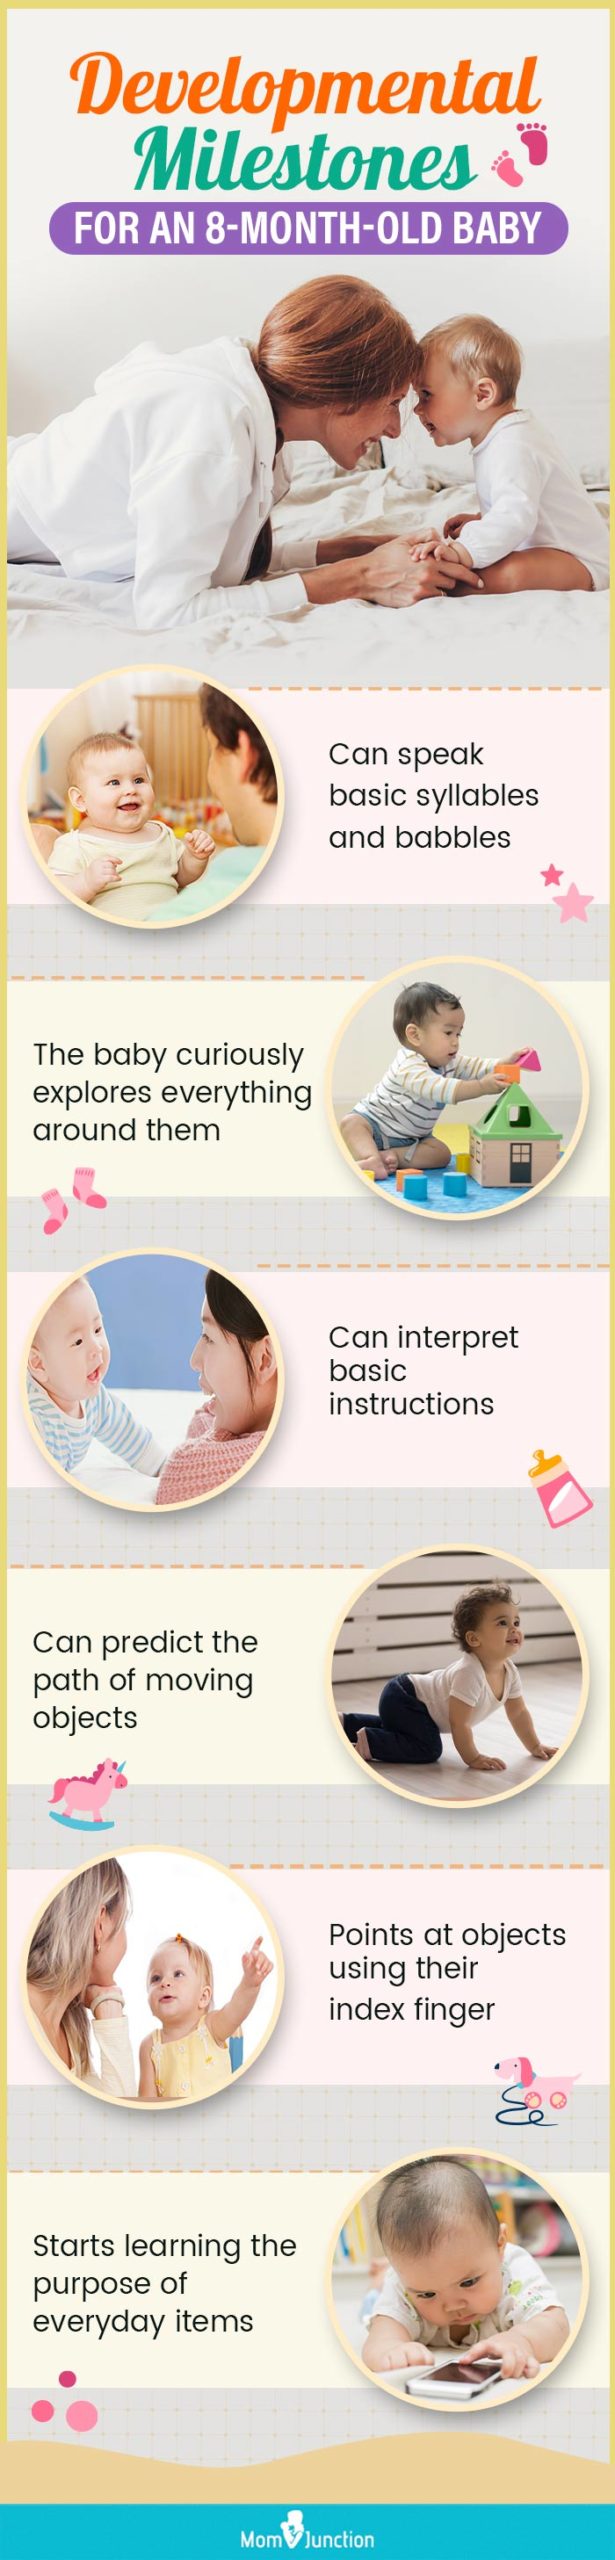 developmental milestones for an 8 month old baby (infographic)